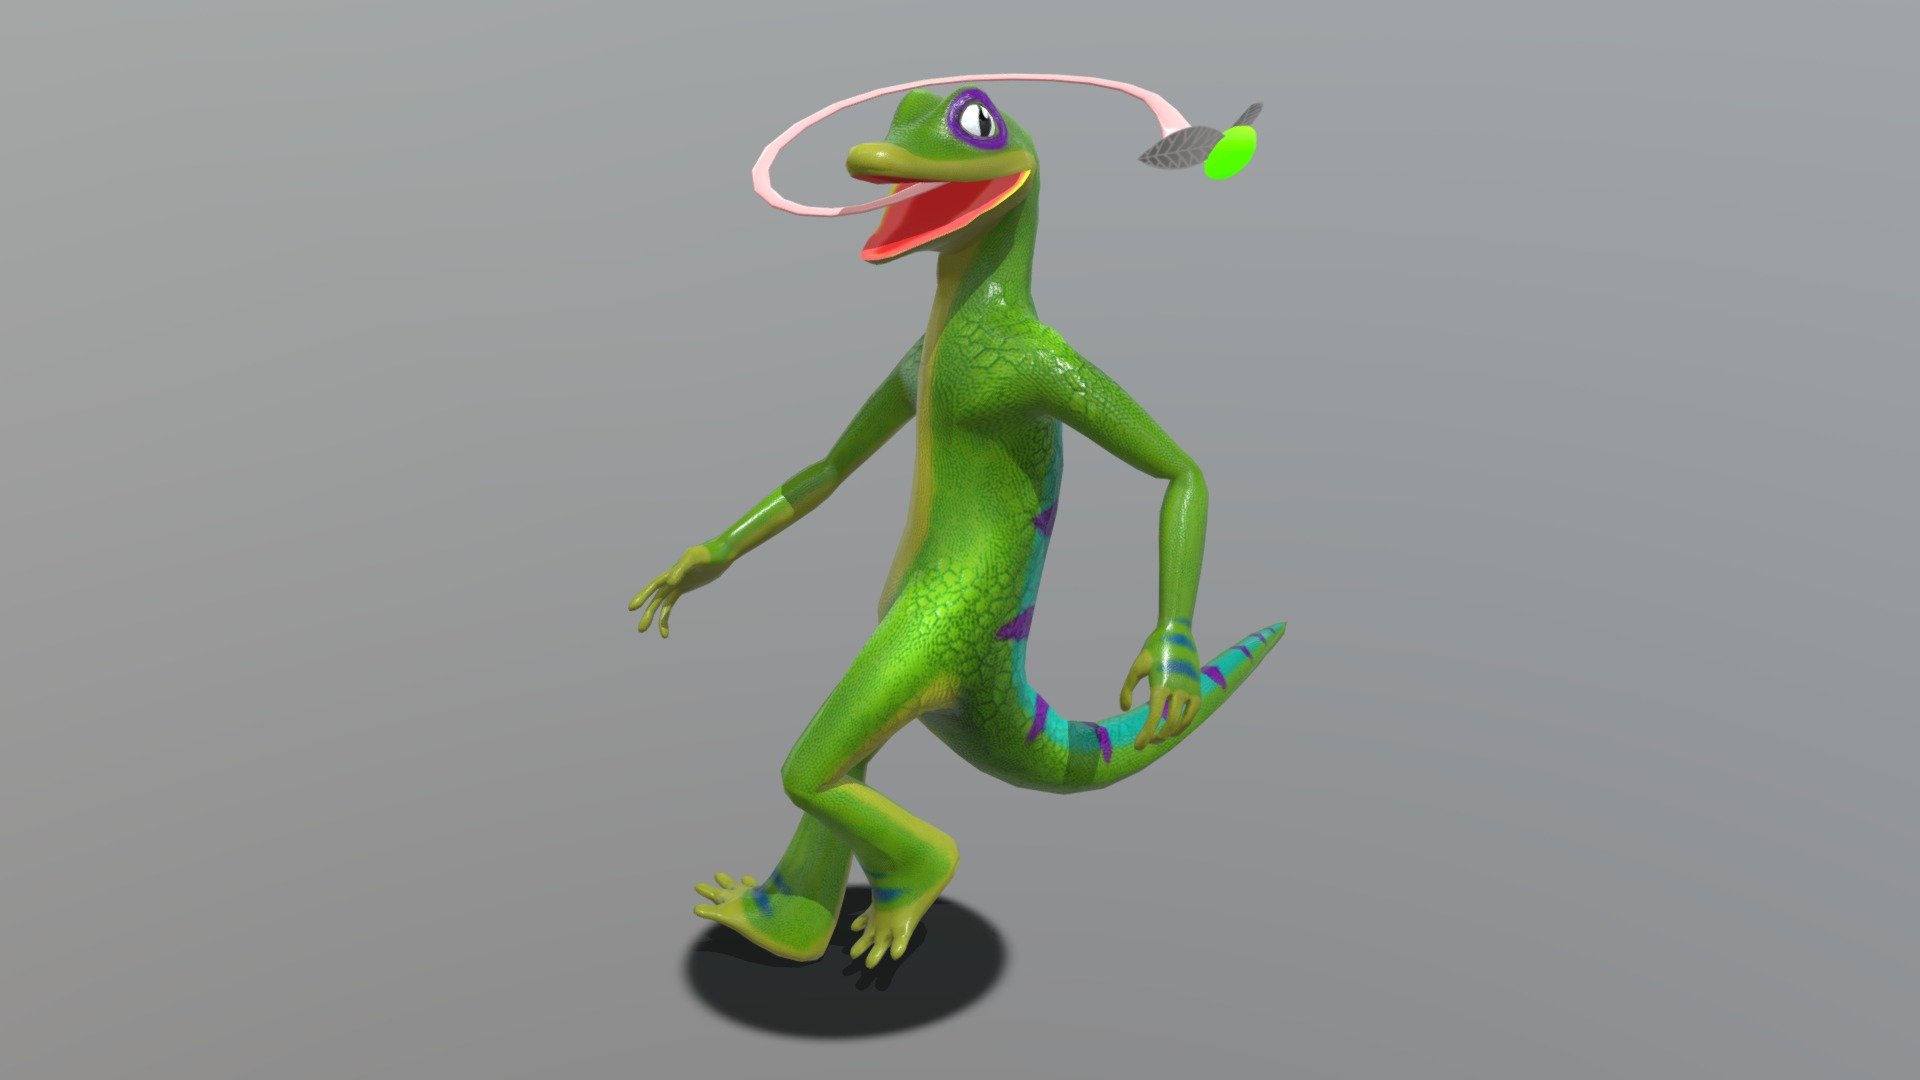 Finally managed to pose the Character of my Bachelor Project of 2014, 
maybe ill finish correcting the brokes js files in the unity5-converted version and upload the game i made&hellip; maybe

anyways, anyone remember gex the gecko of crystal dynamics? - Gex - 3D model by Vendetti 3d model